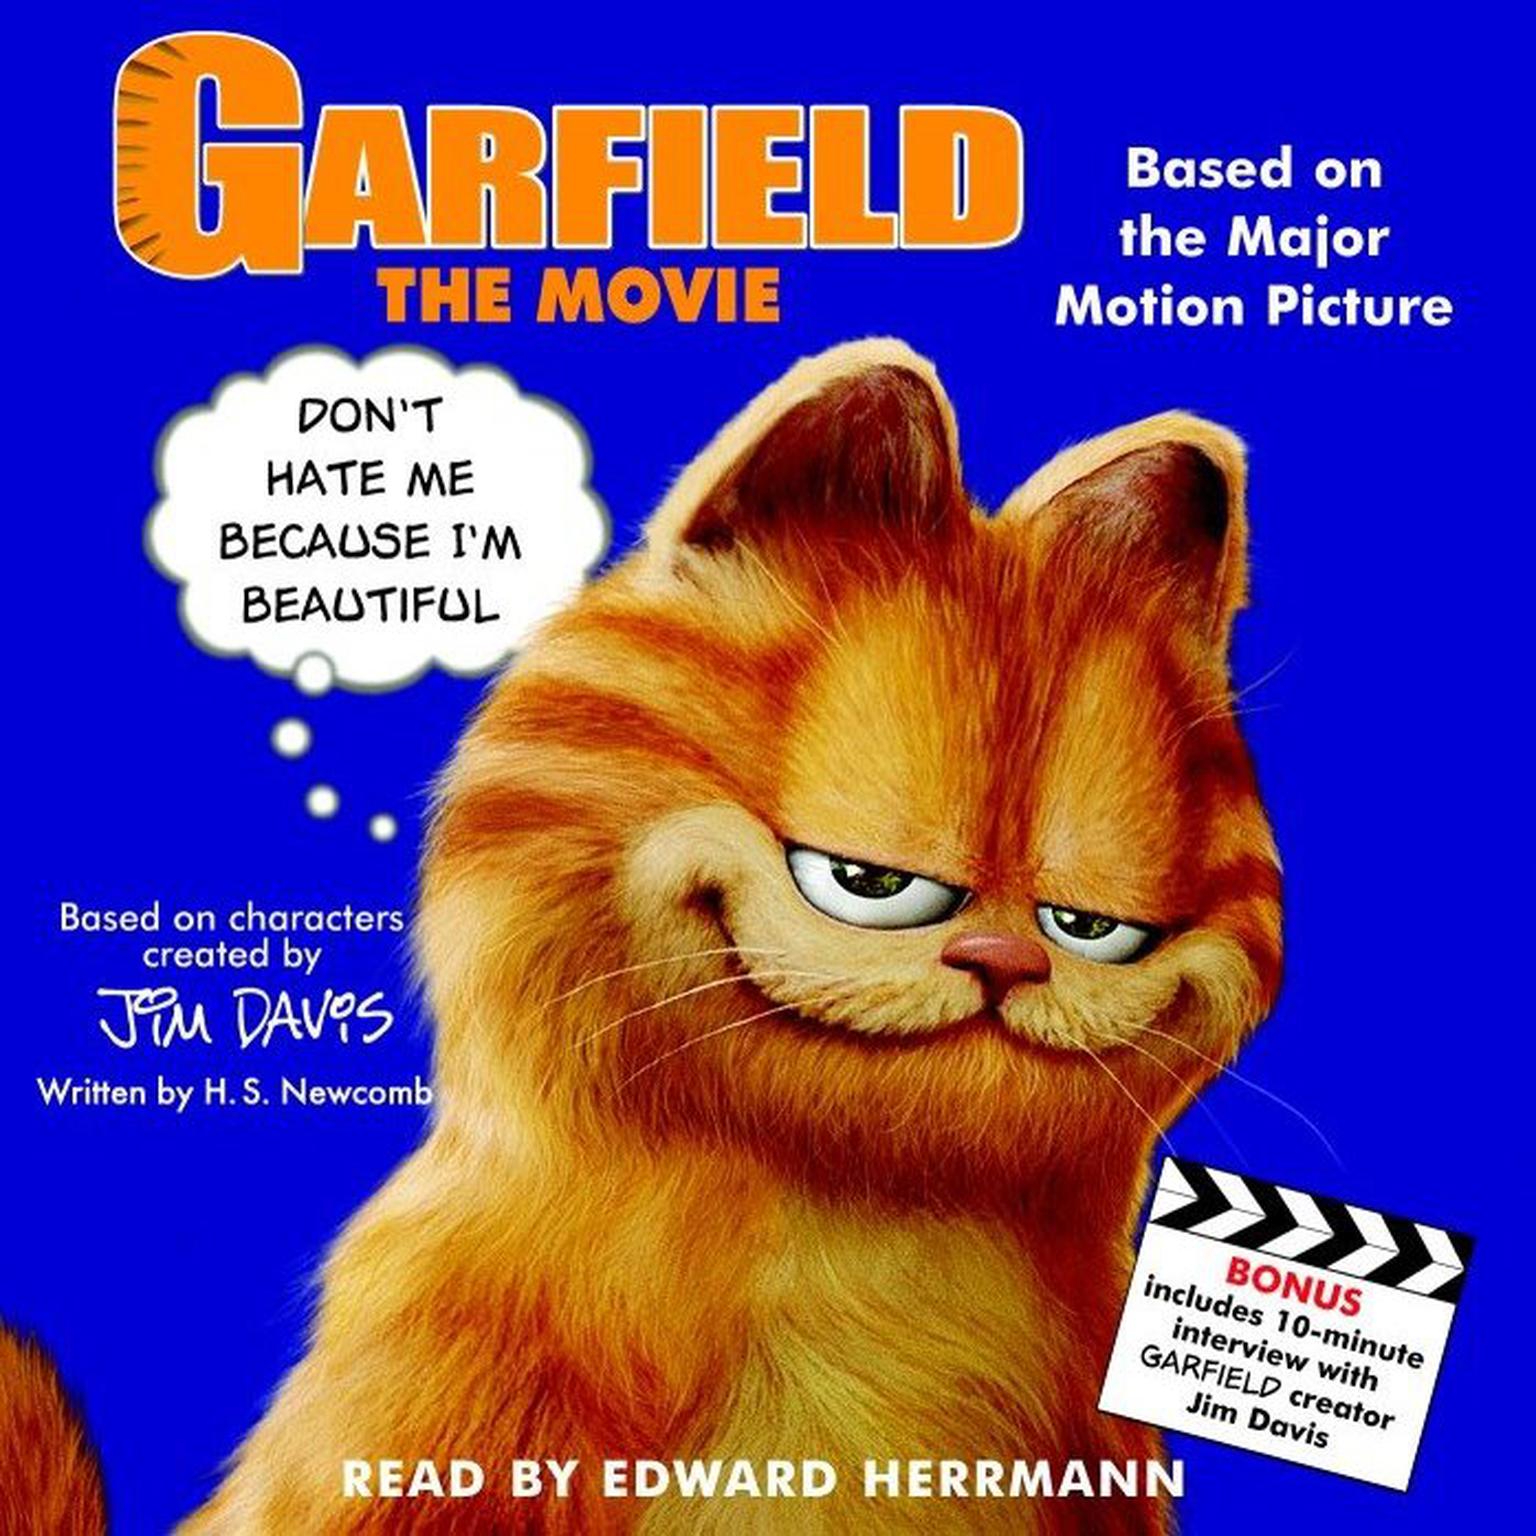 Garfield the Movie (Abridged) Audiobook, by H. S. Newcomb